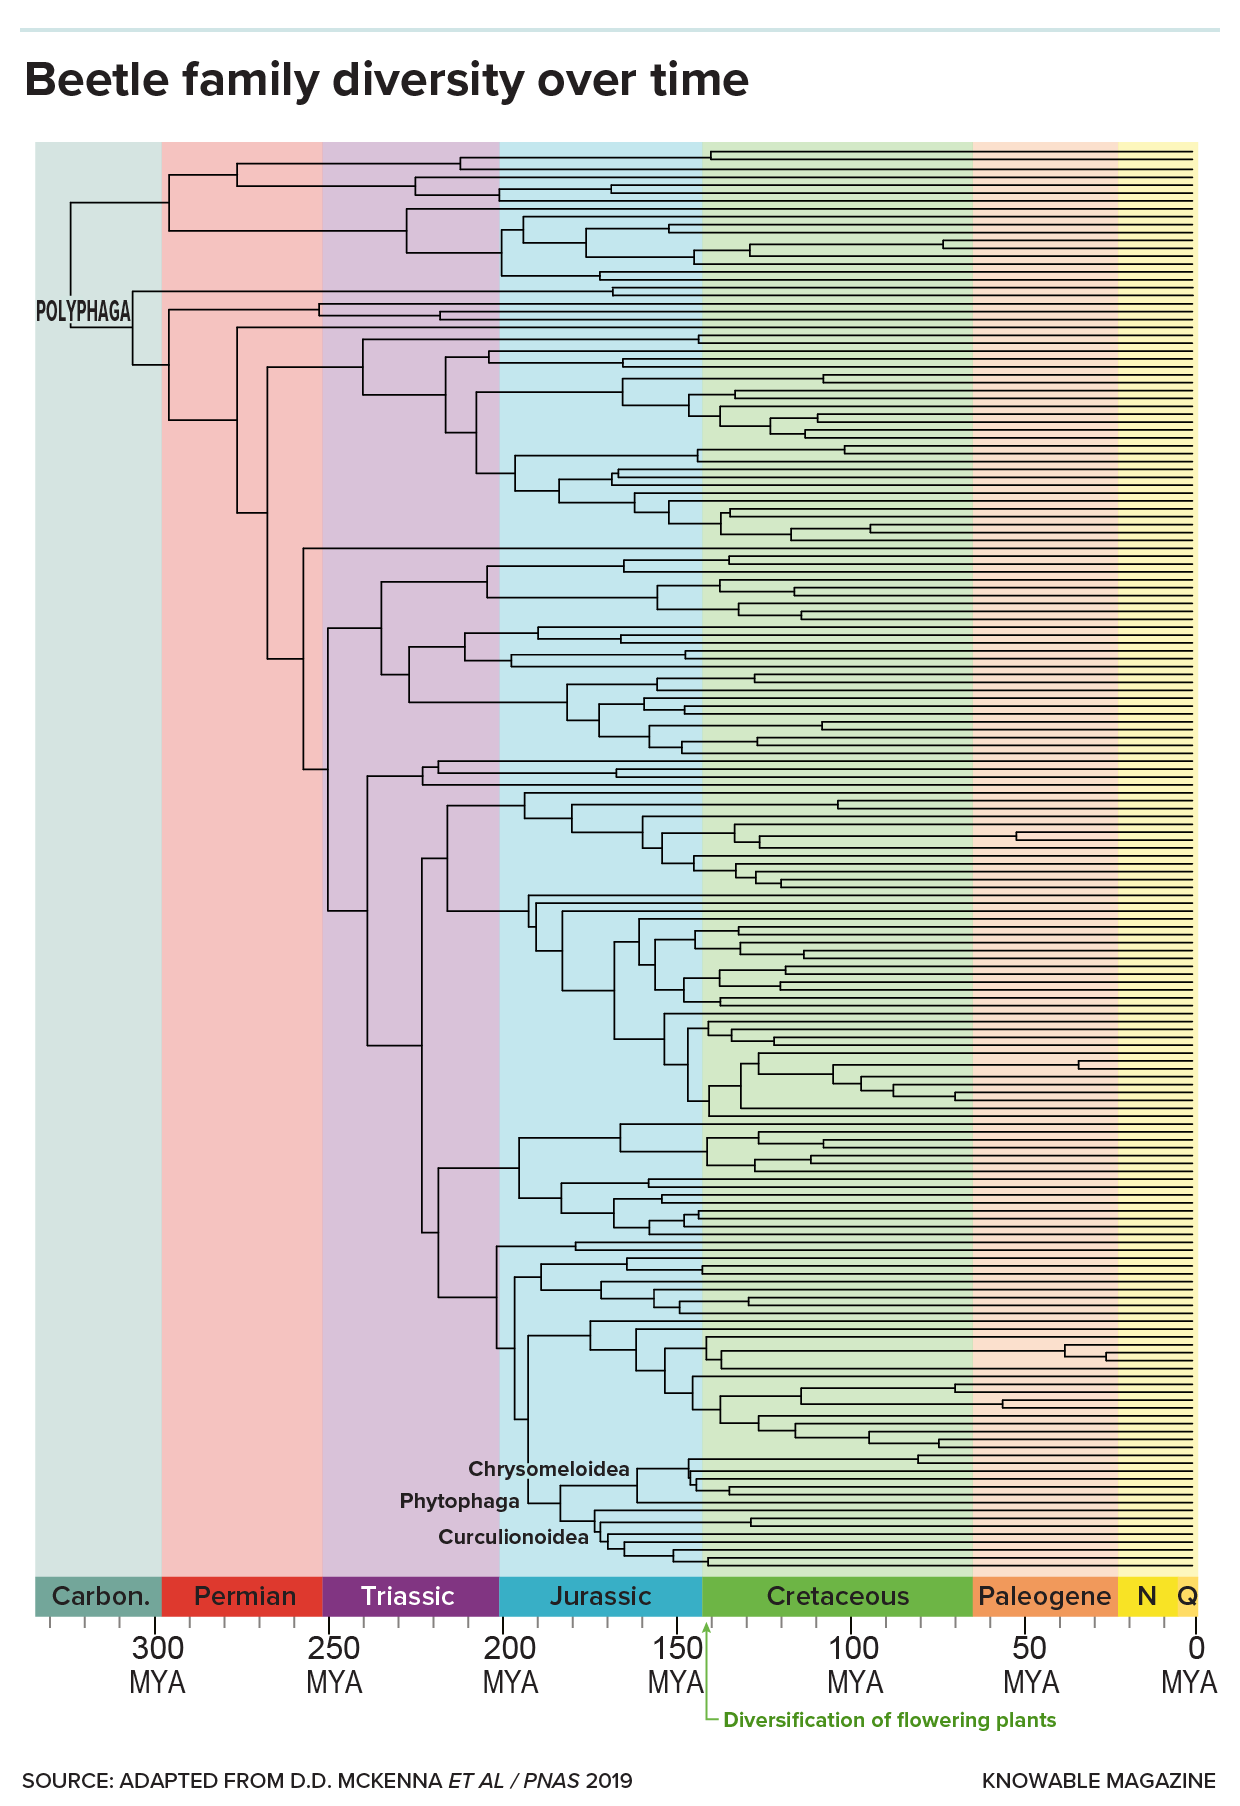 Graphic shows a family tree of beetle evolution over the last 350 million years. Beetle families branched into different groups, with an increasing density of branches developing with the spread of flowering plants.